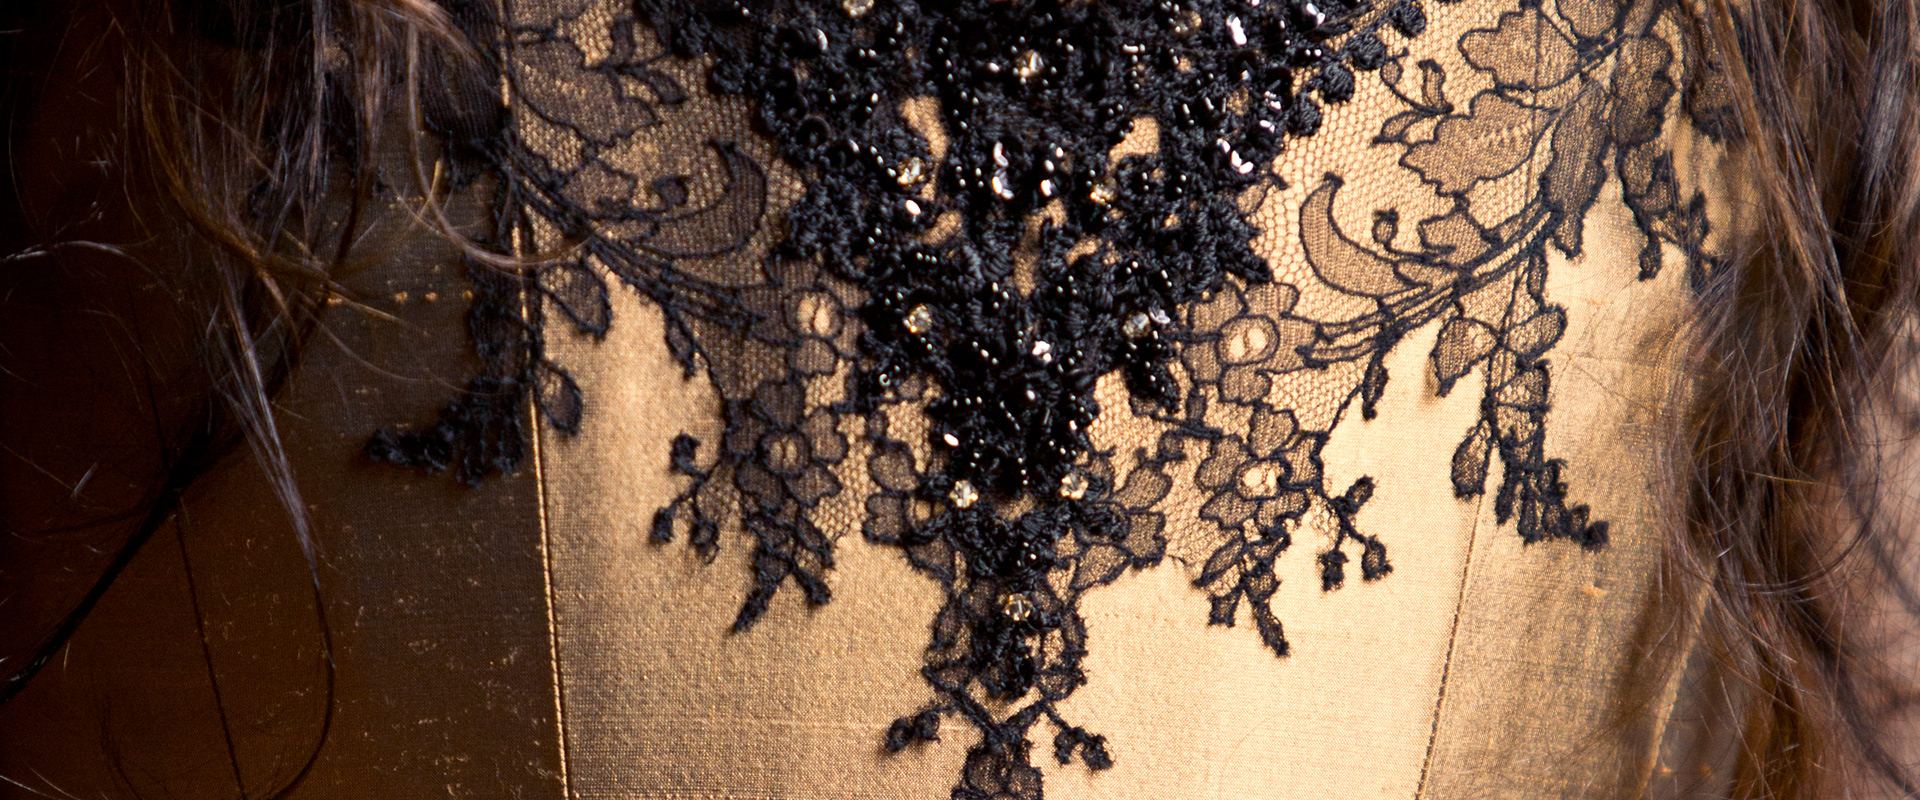 Close up of black lace applique on gothic wedding gown by Vanyanis © Mark Anthony Boyle